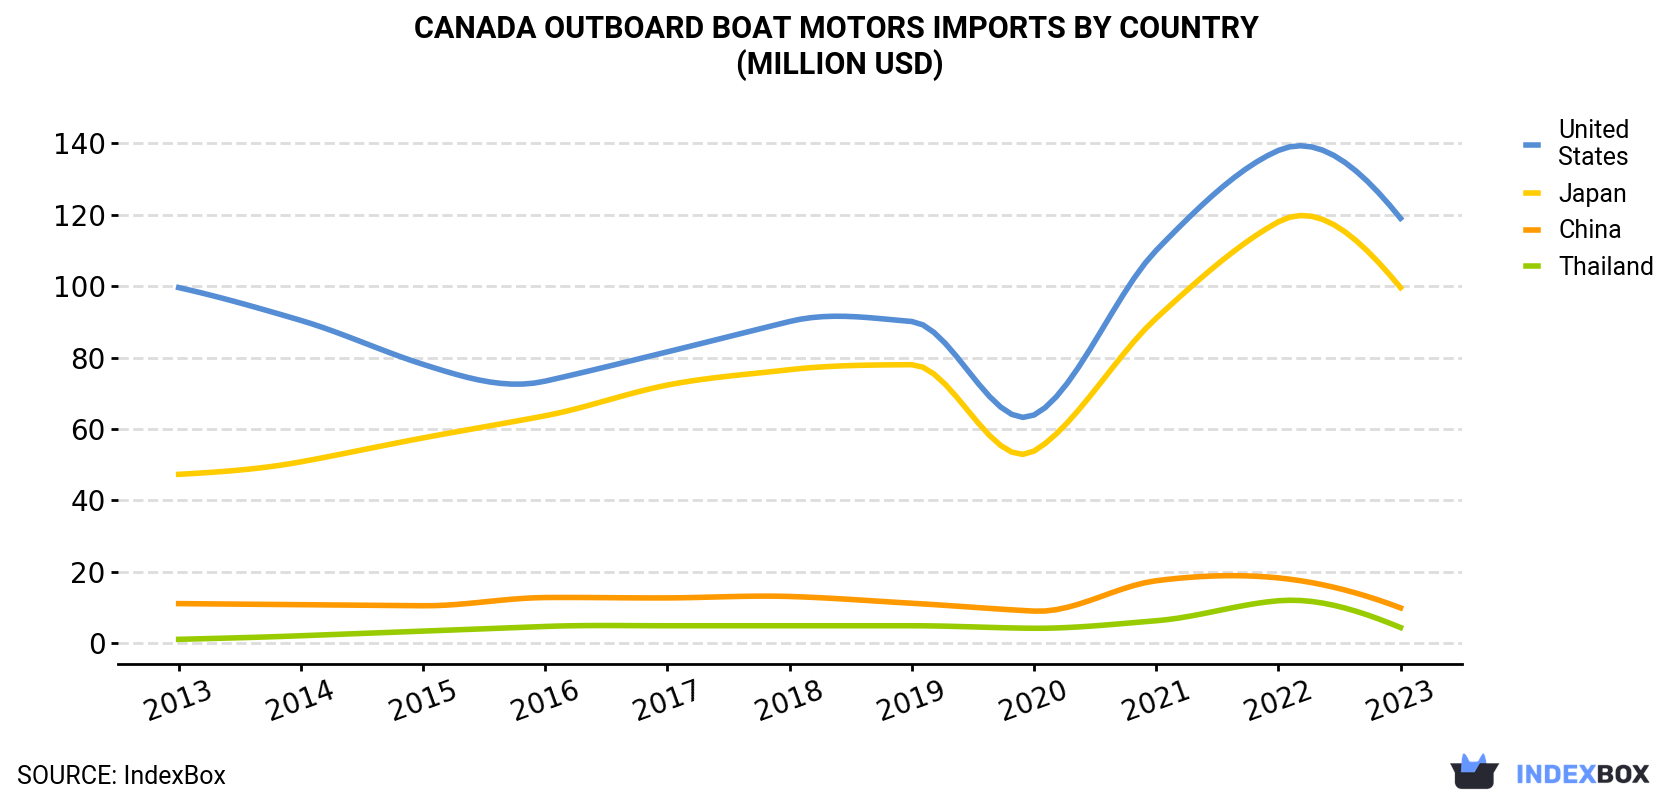 Canada Outboard Boat Motors Imports By Country (Million USD)